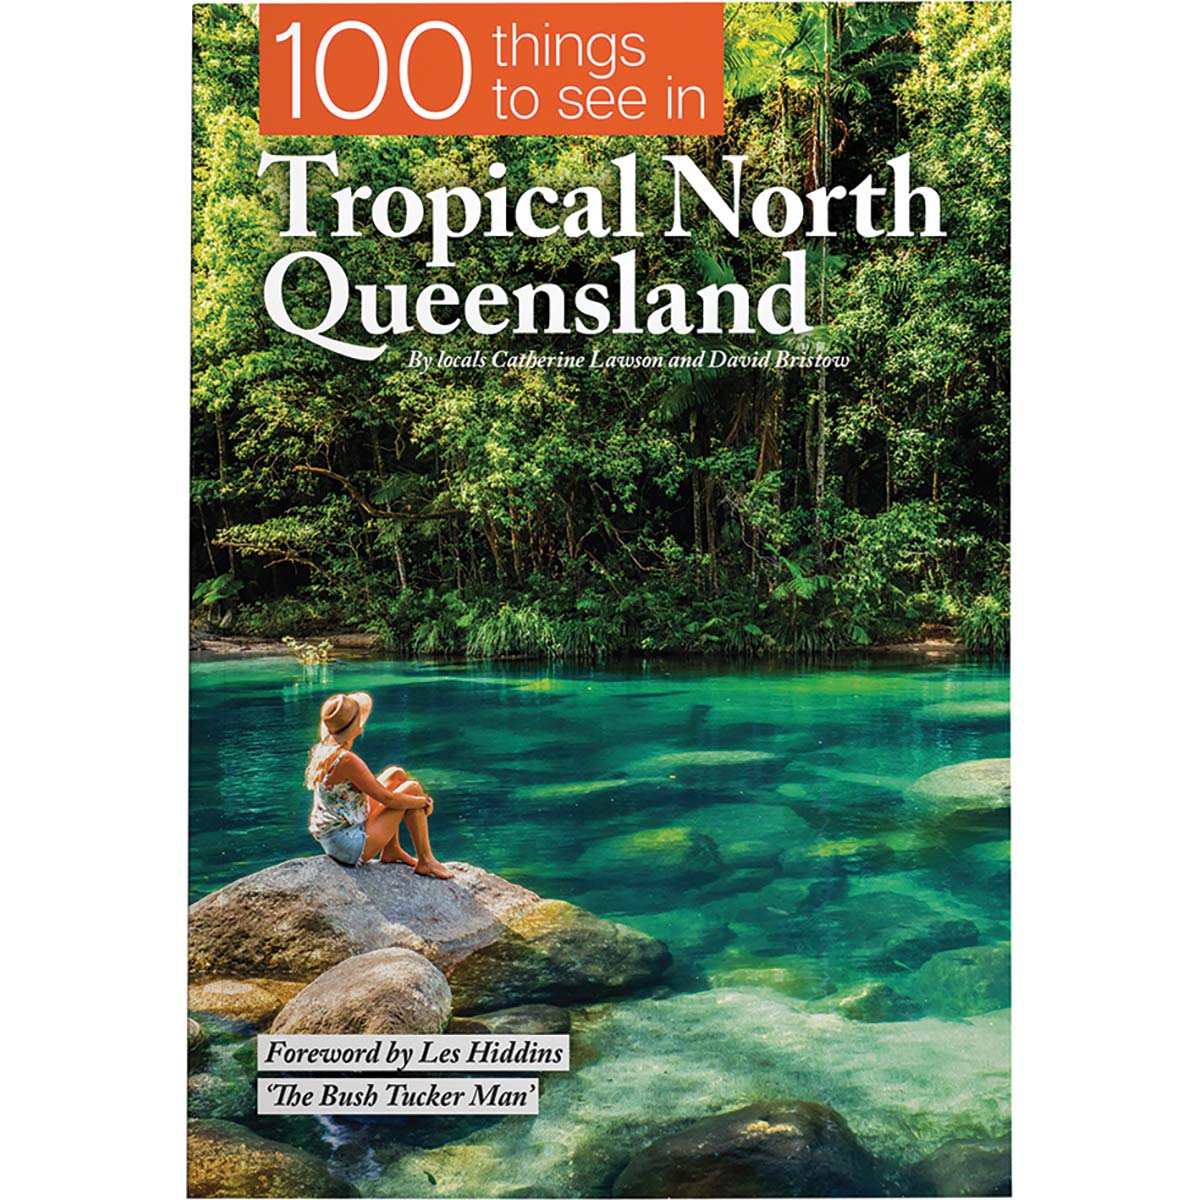 100 Things to See in Tropical North Queensland